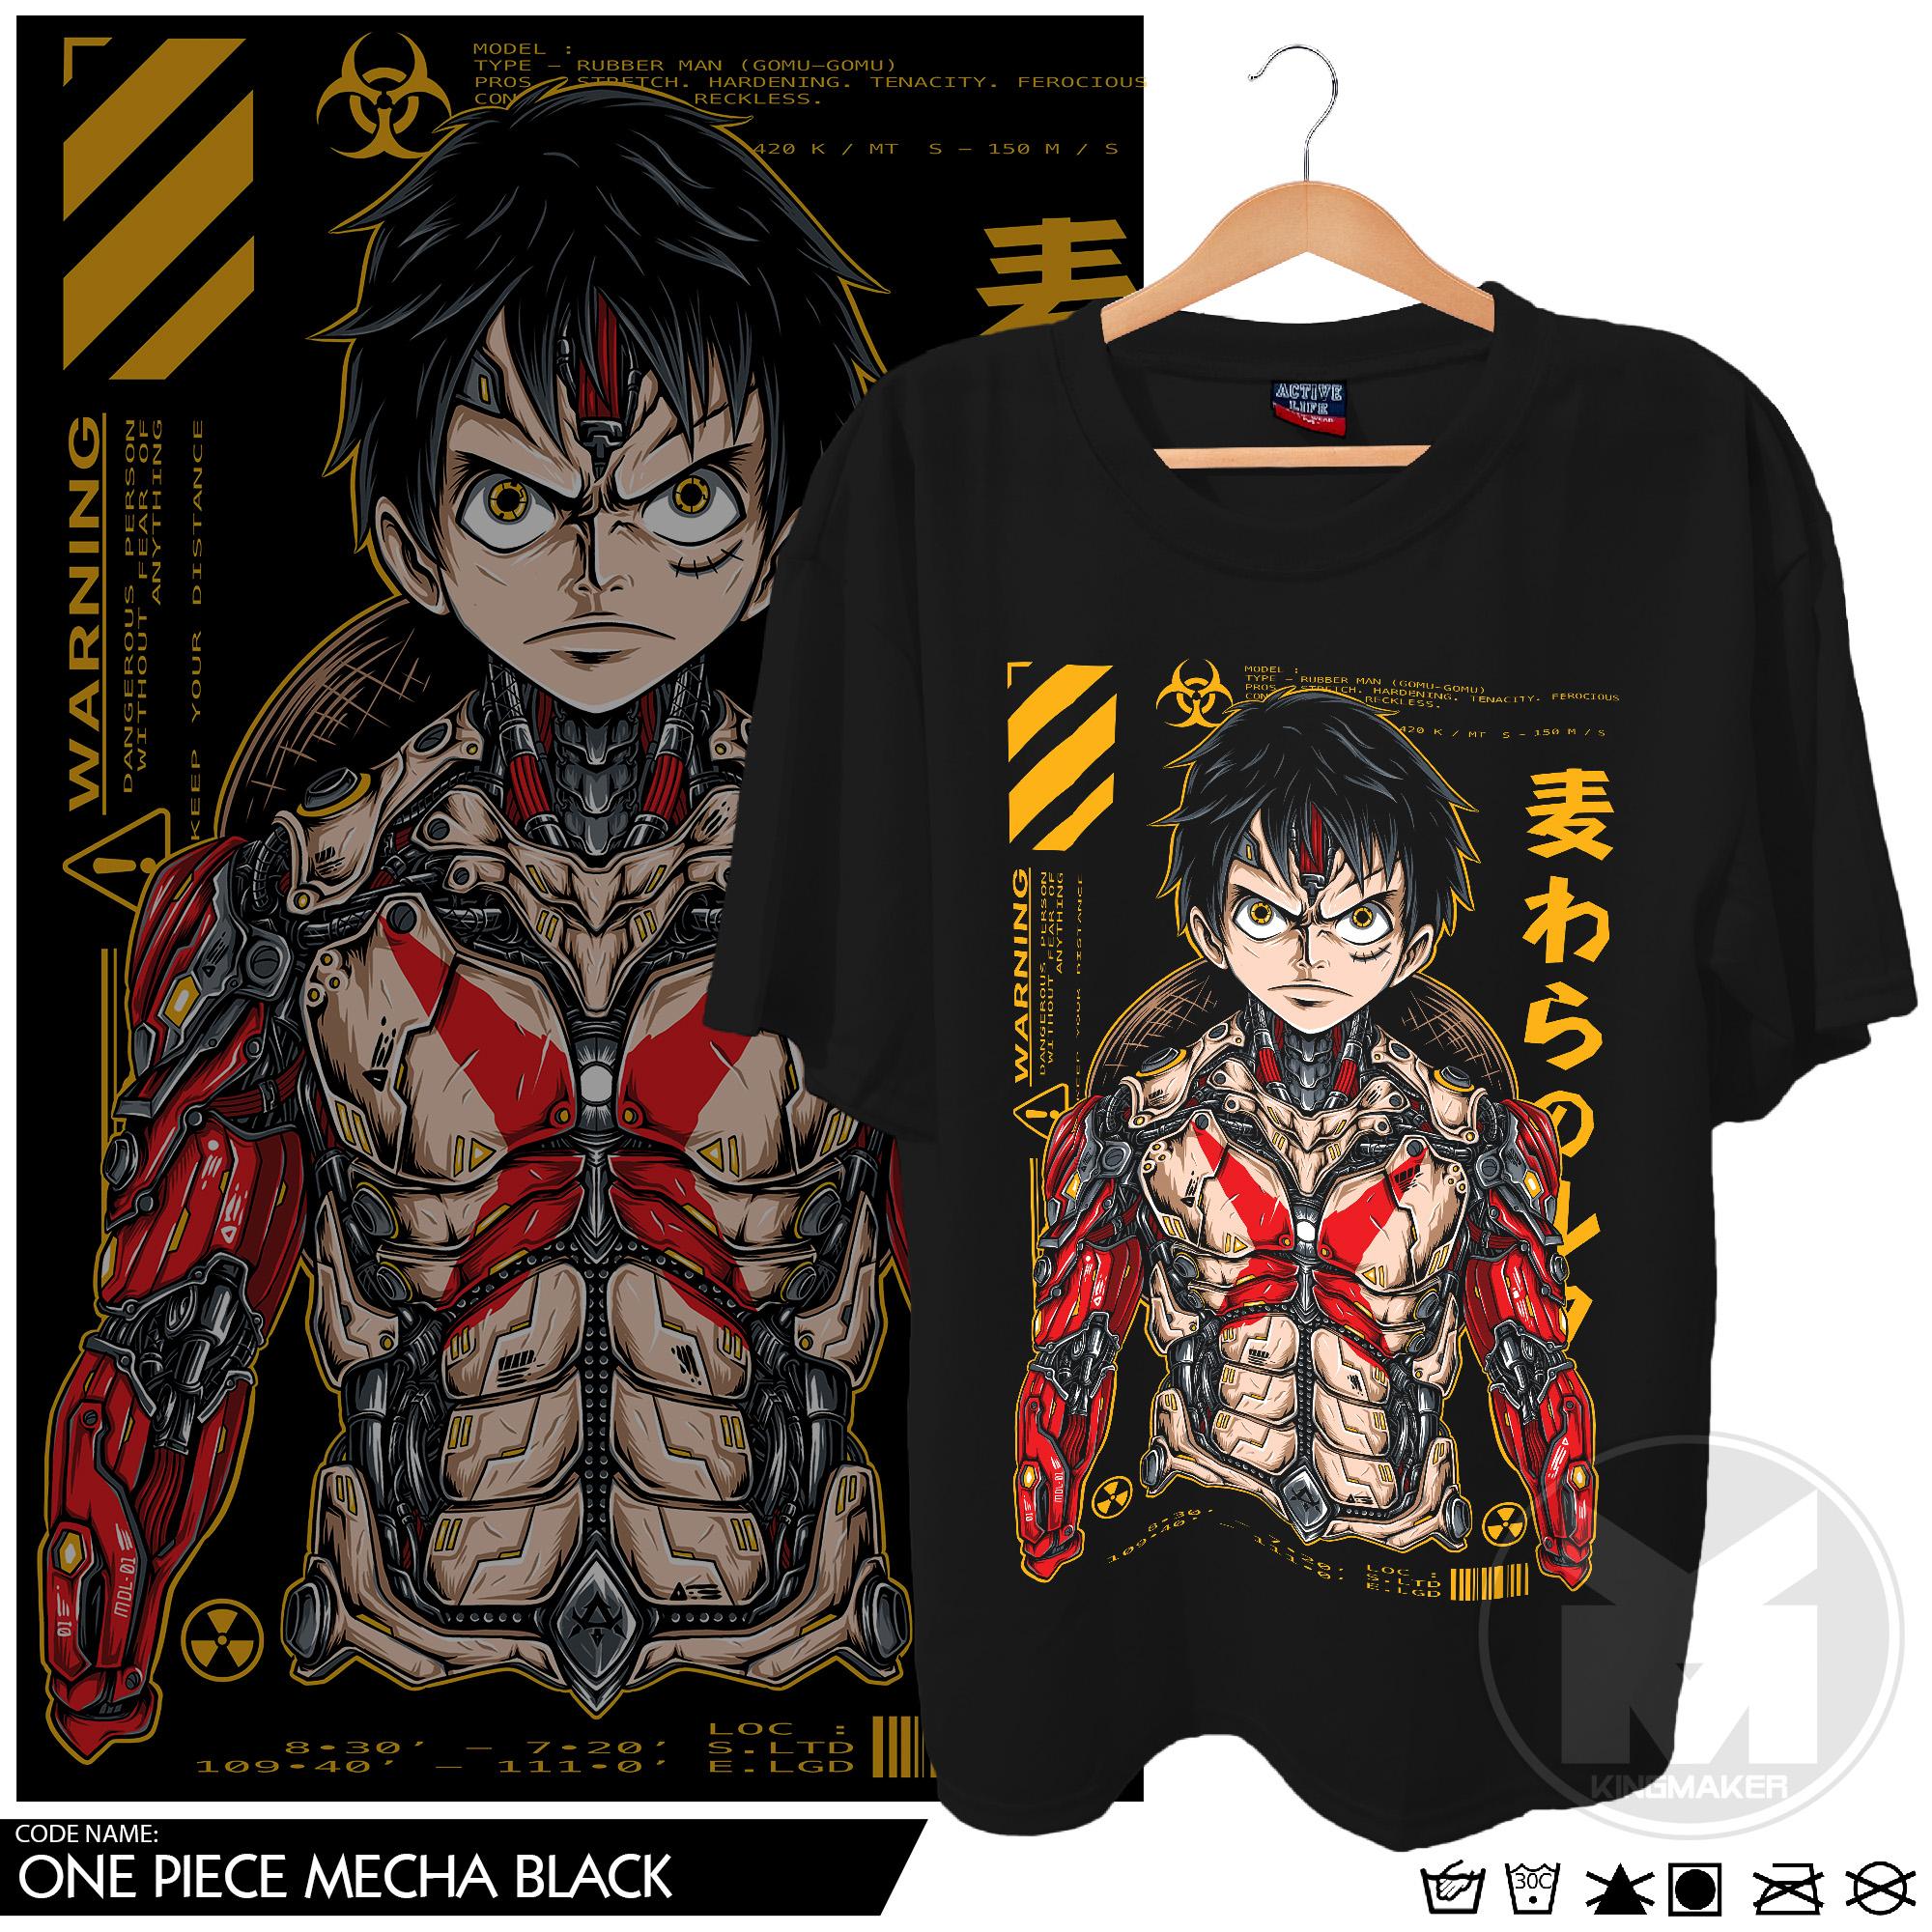 Anime T-shirt - Premium Licensed Anime shirts from 10 USD